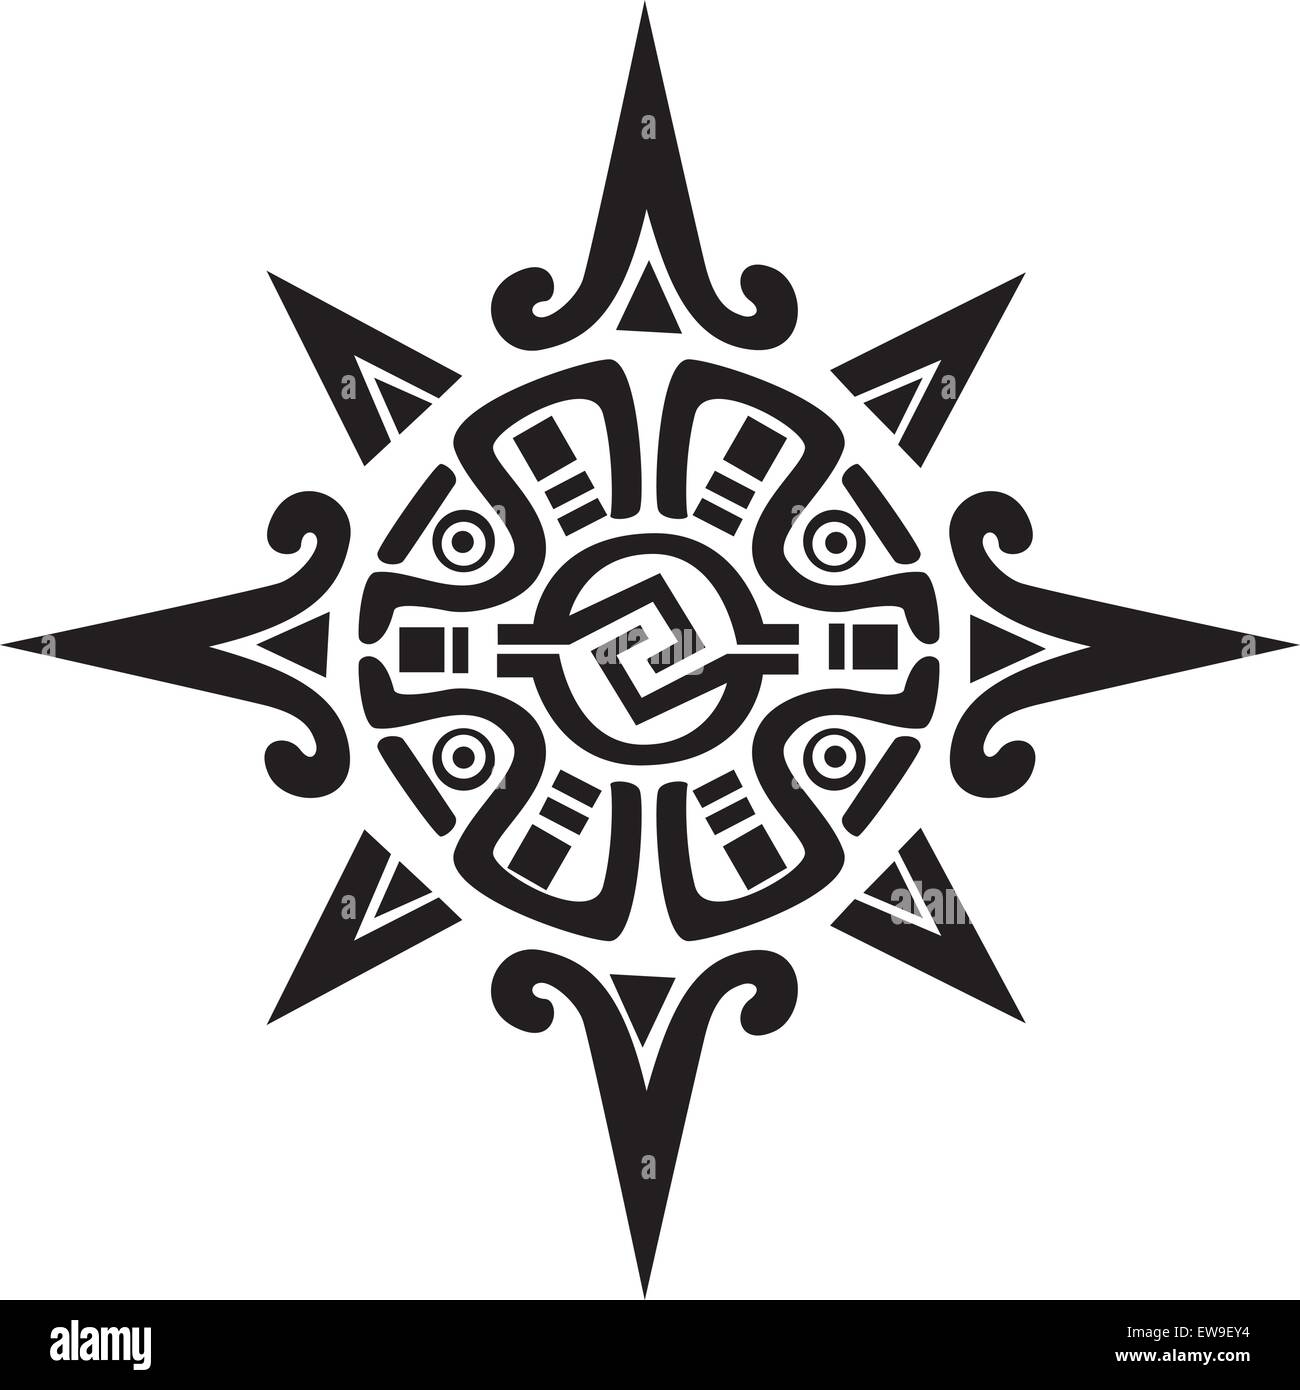 Mayan or Incan symbol of a sun or star, isolated on white. Great for tattoo or artwork Stock Vector